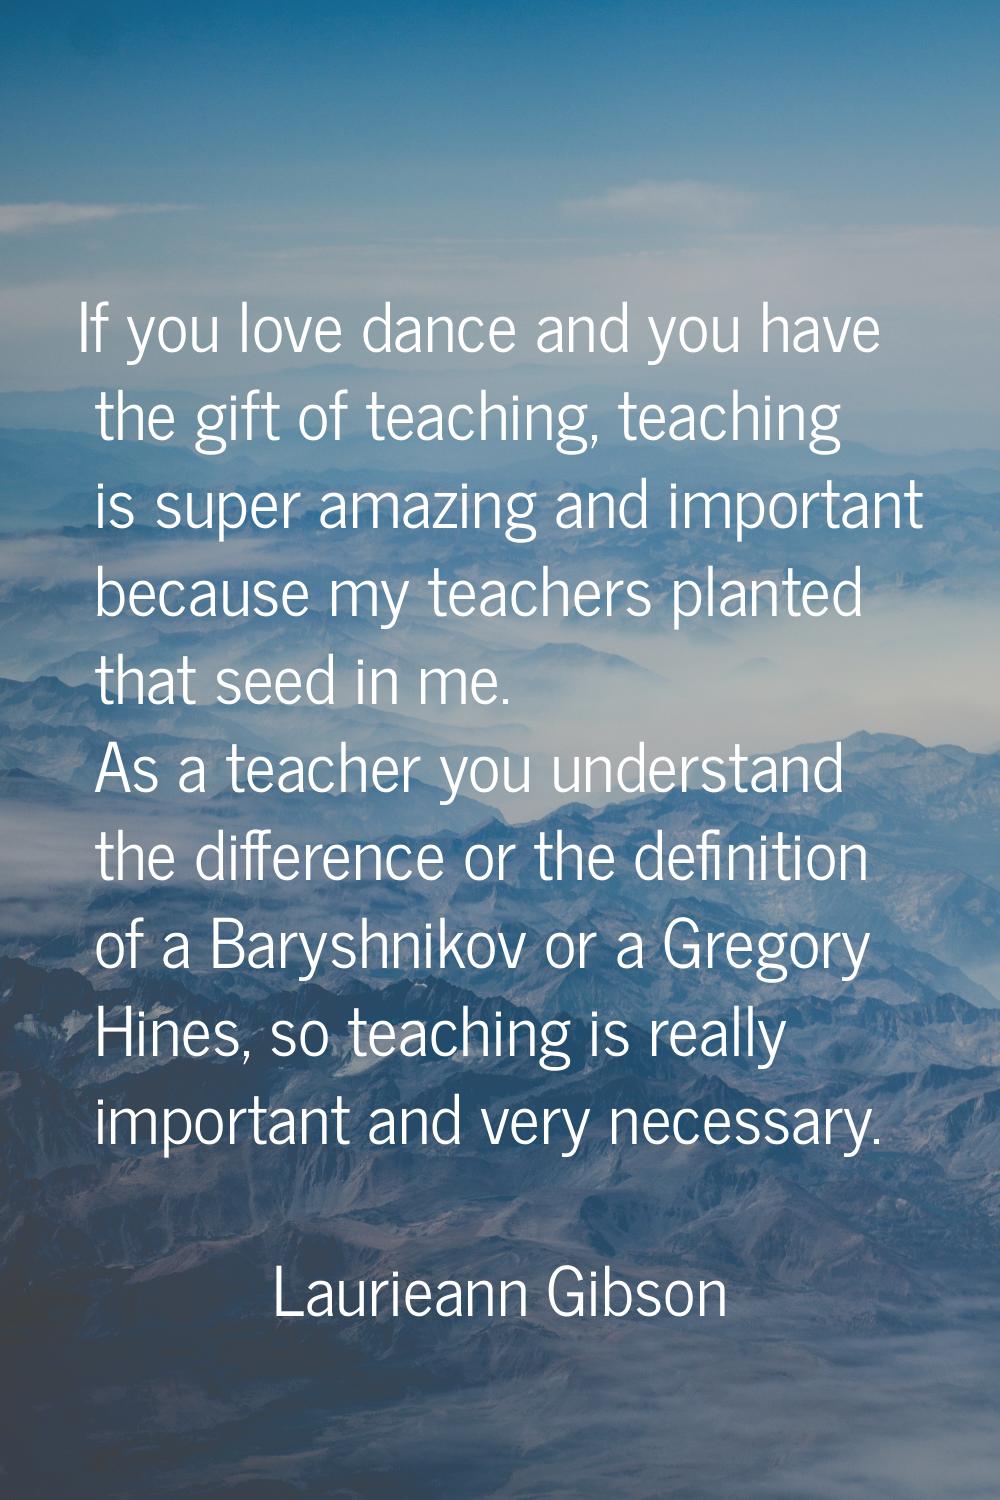 If you love dance and you have the gift of teaching, teaching is super amazing and important becaus